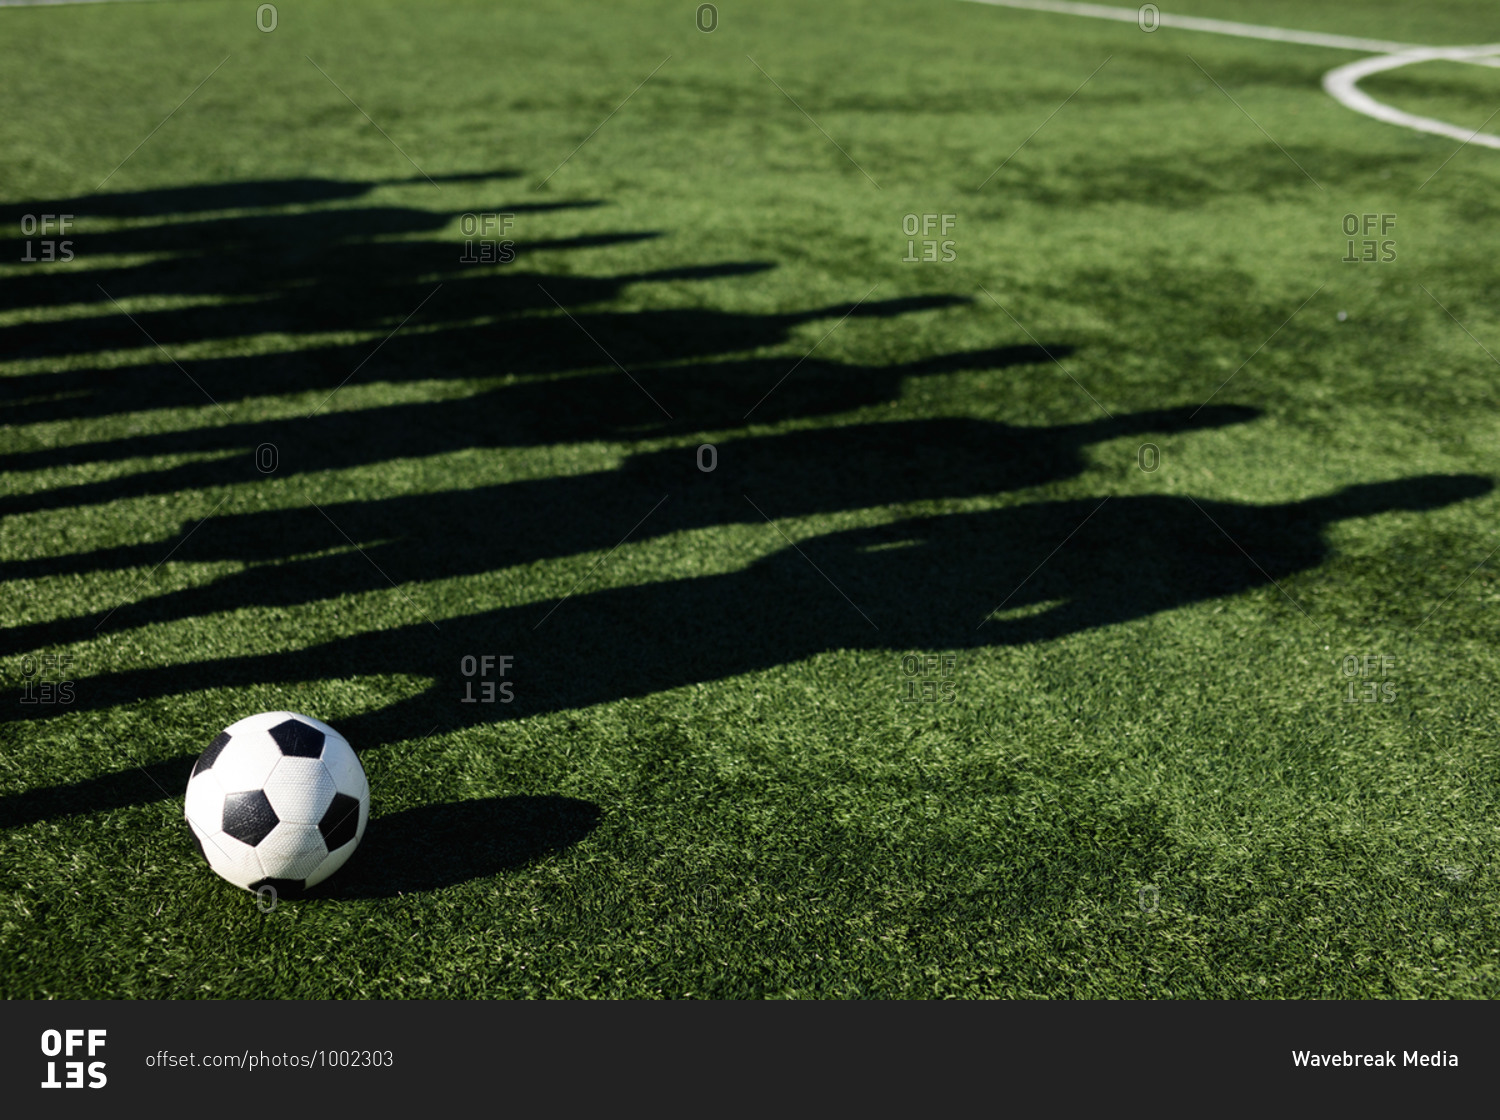 Shadow on grass pitch of group of male football players training at a sports field in the sun, standing next to each other ball next to them.